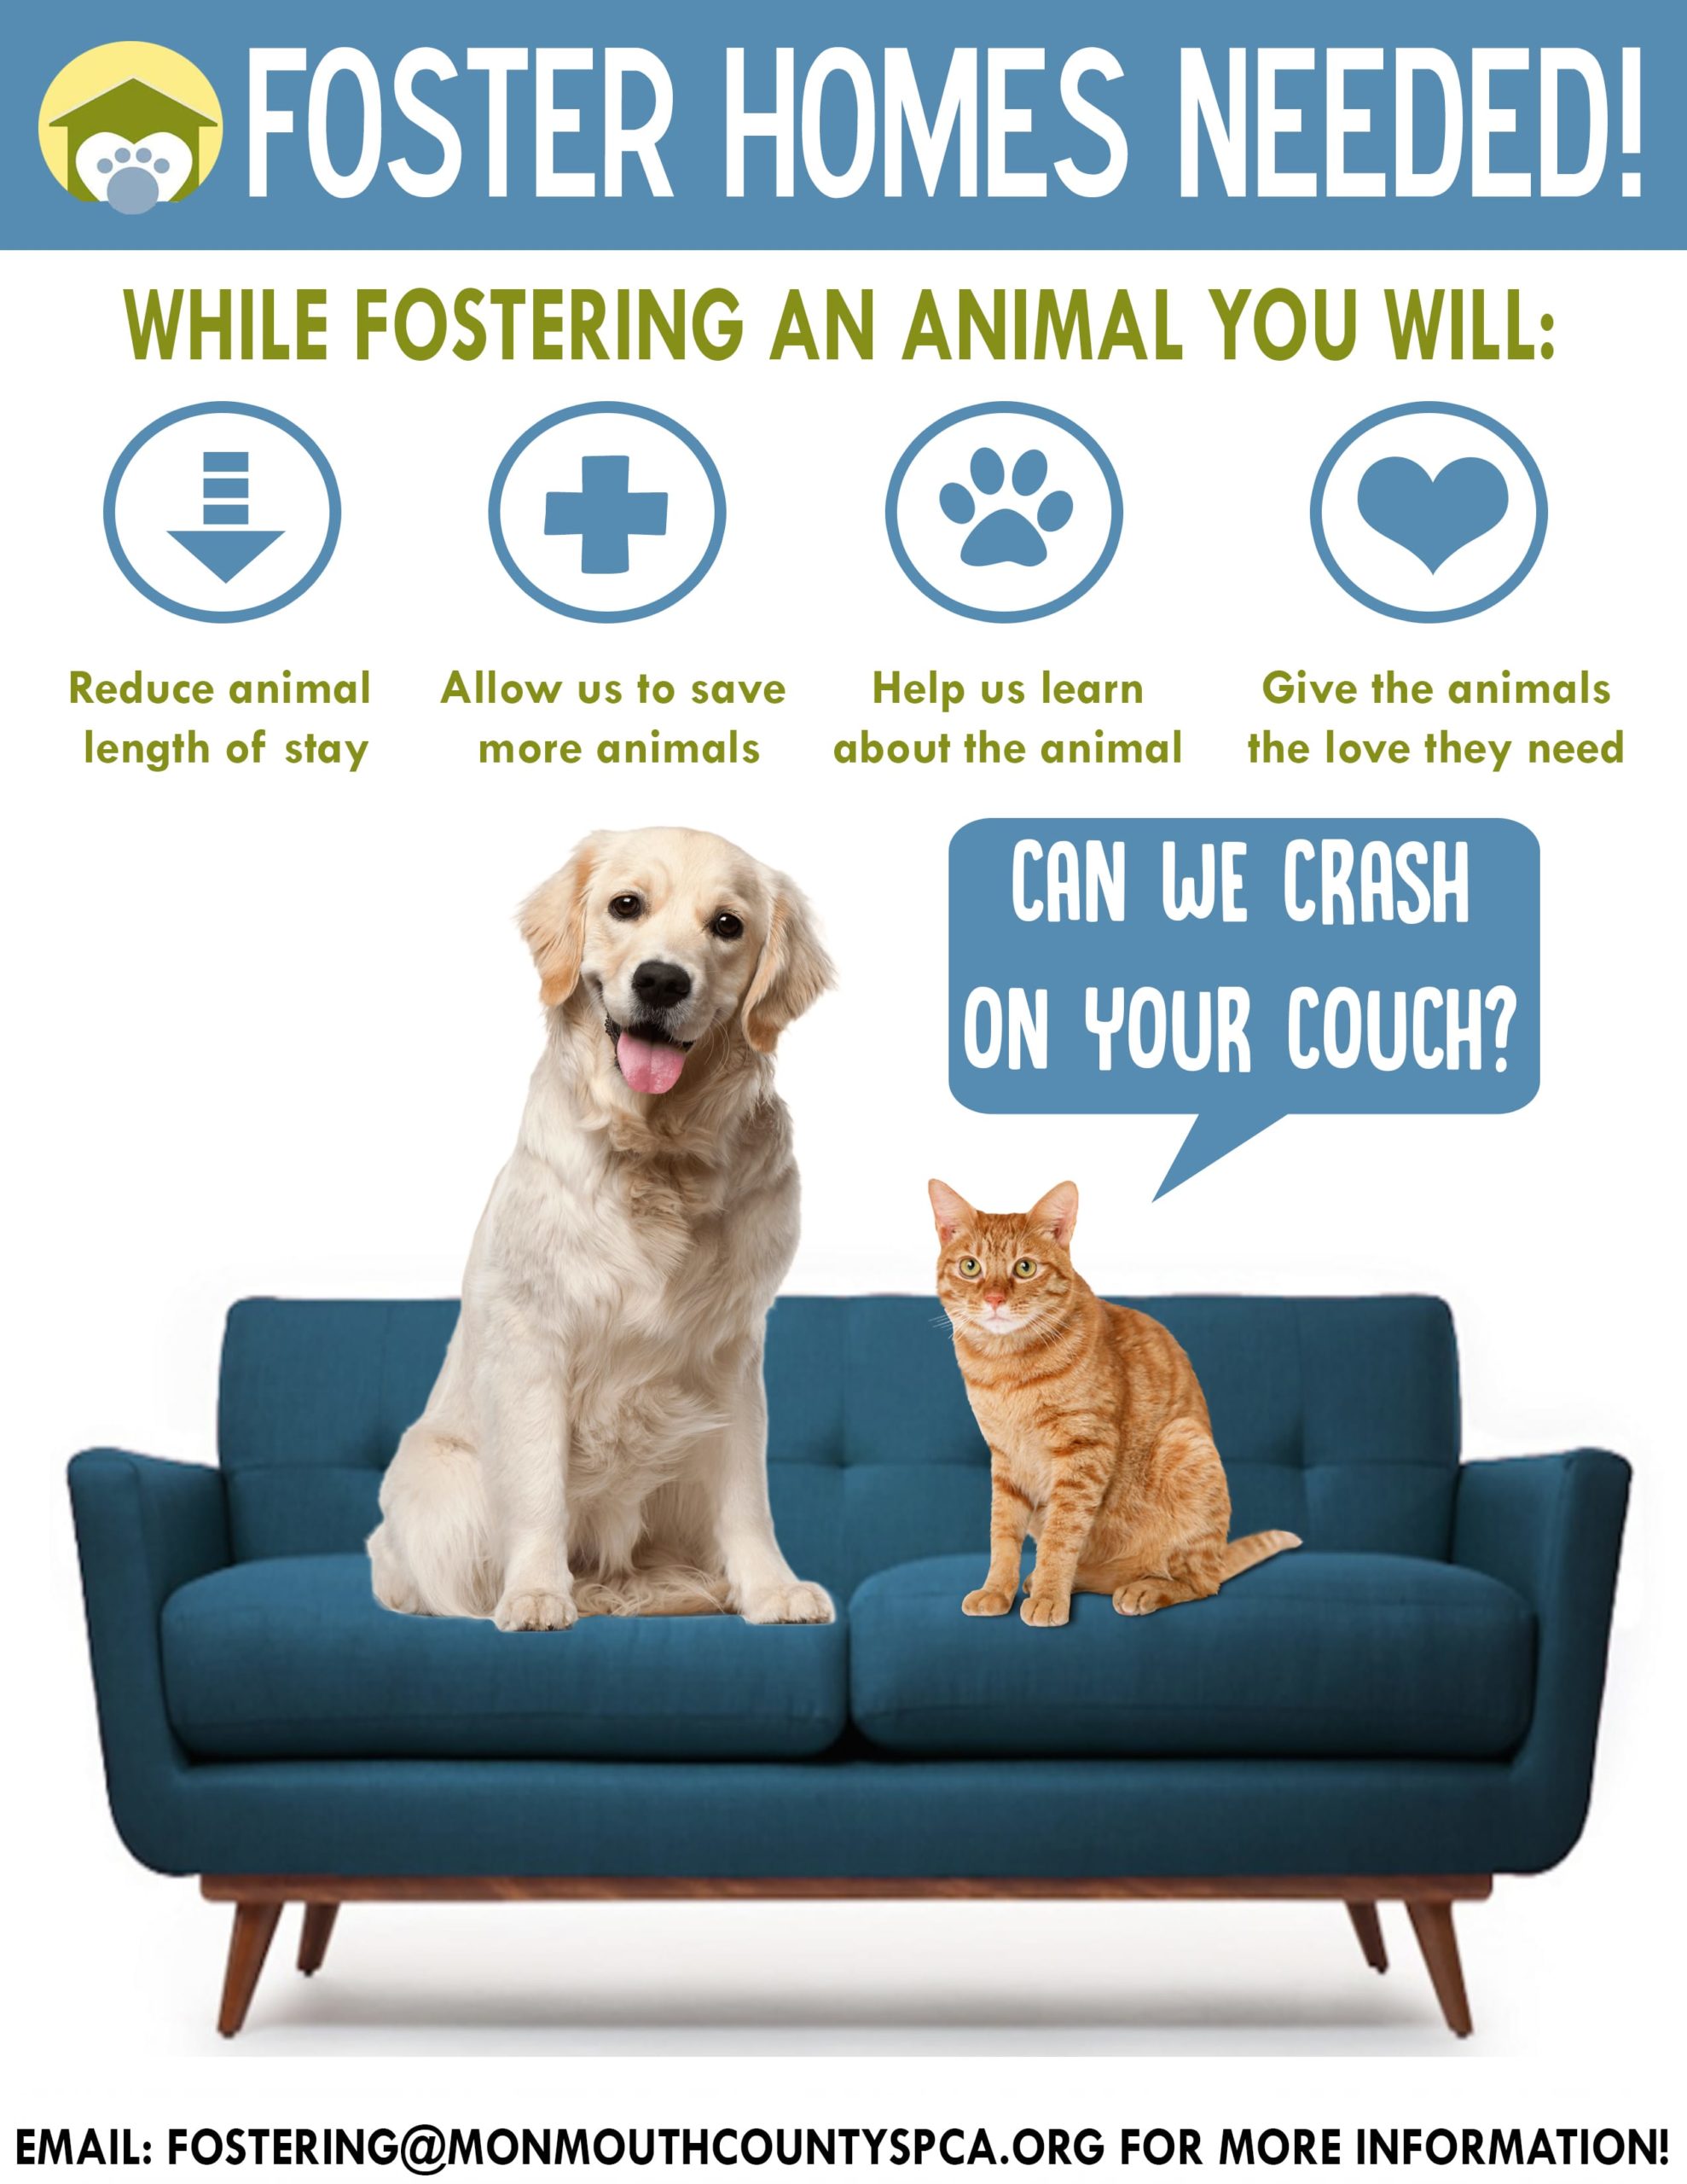 can foster carers have dogs